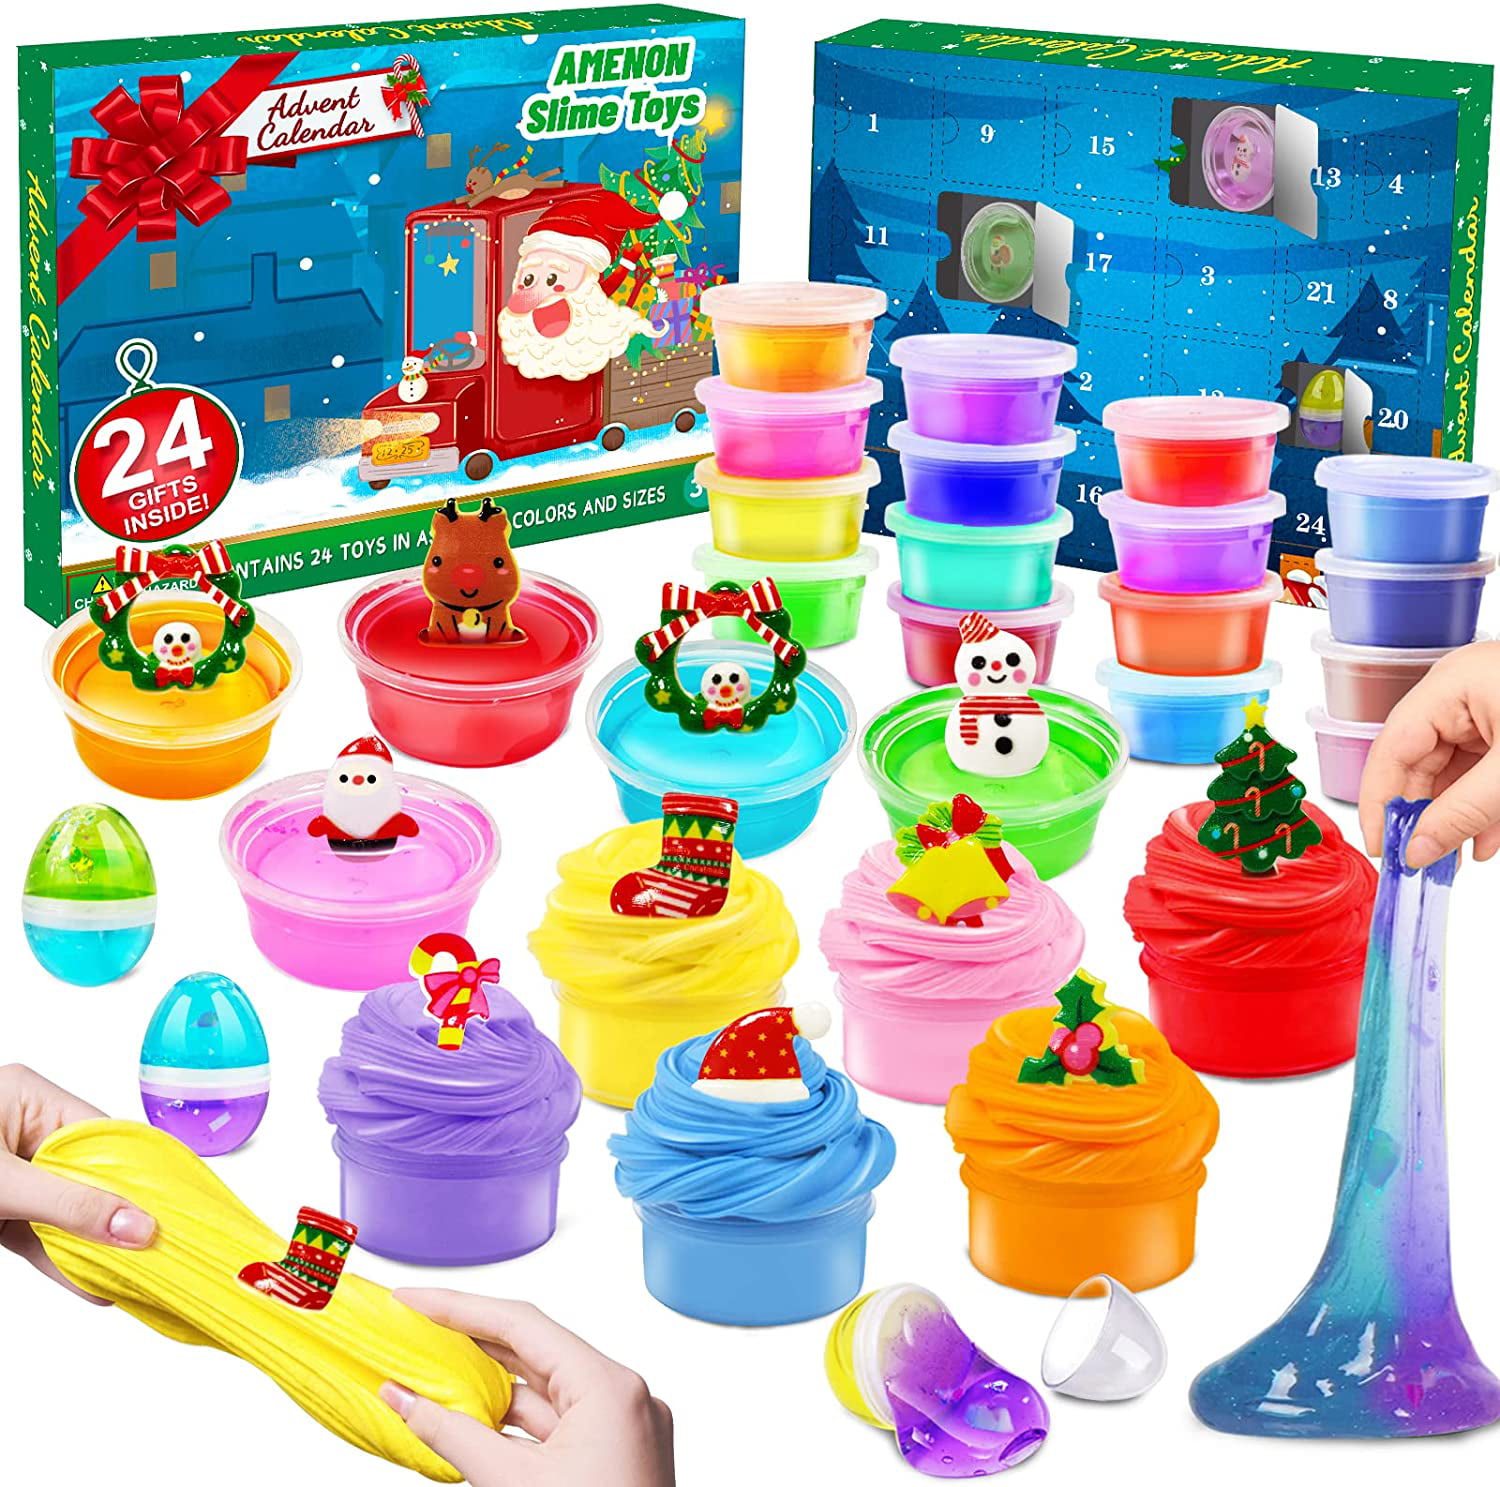 DIY Make Your Own Creative Slime Putty Kids Toy Christmas Gift Play Lab Kit 17 